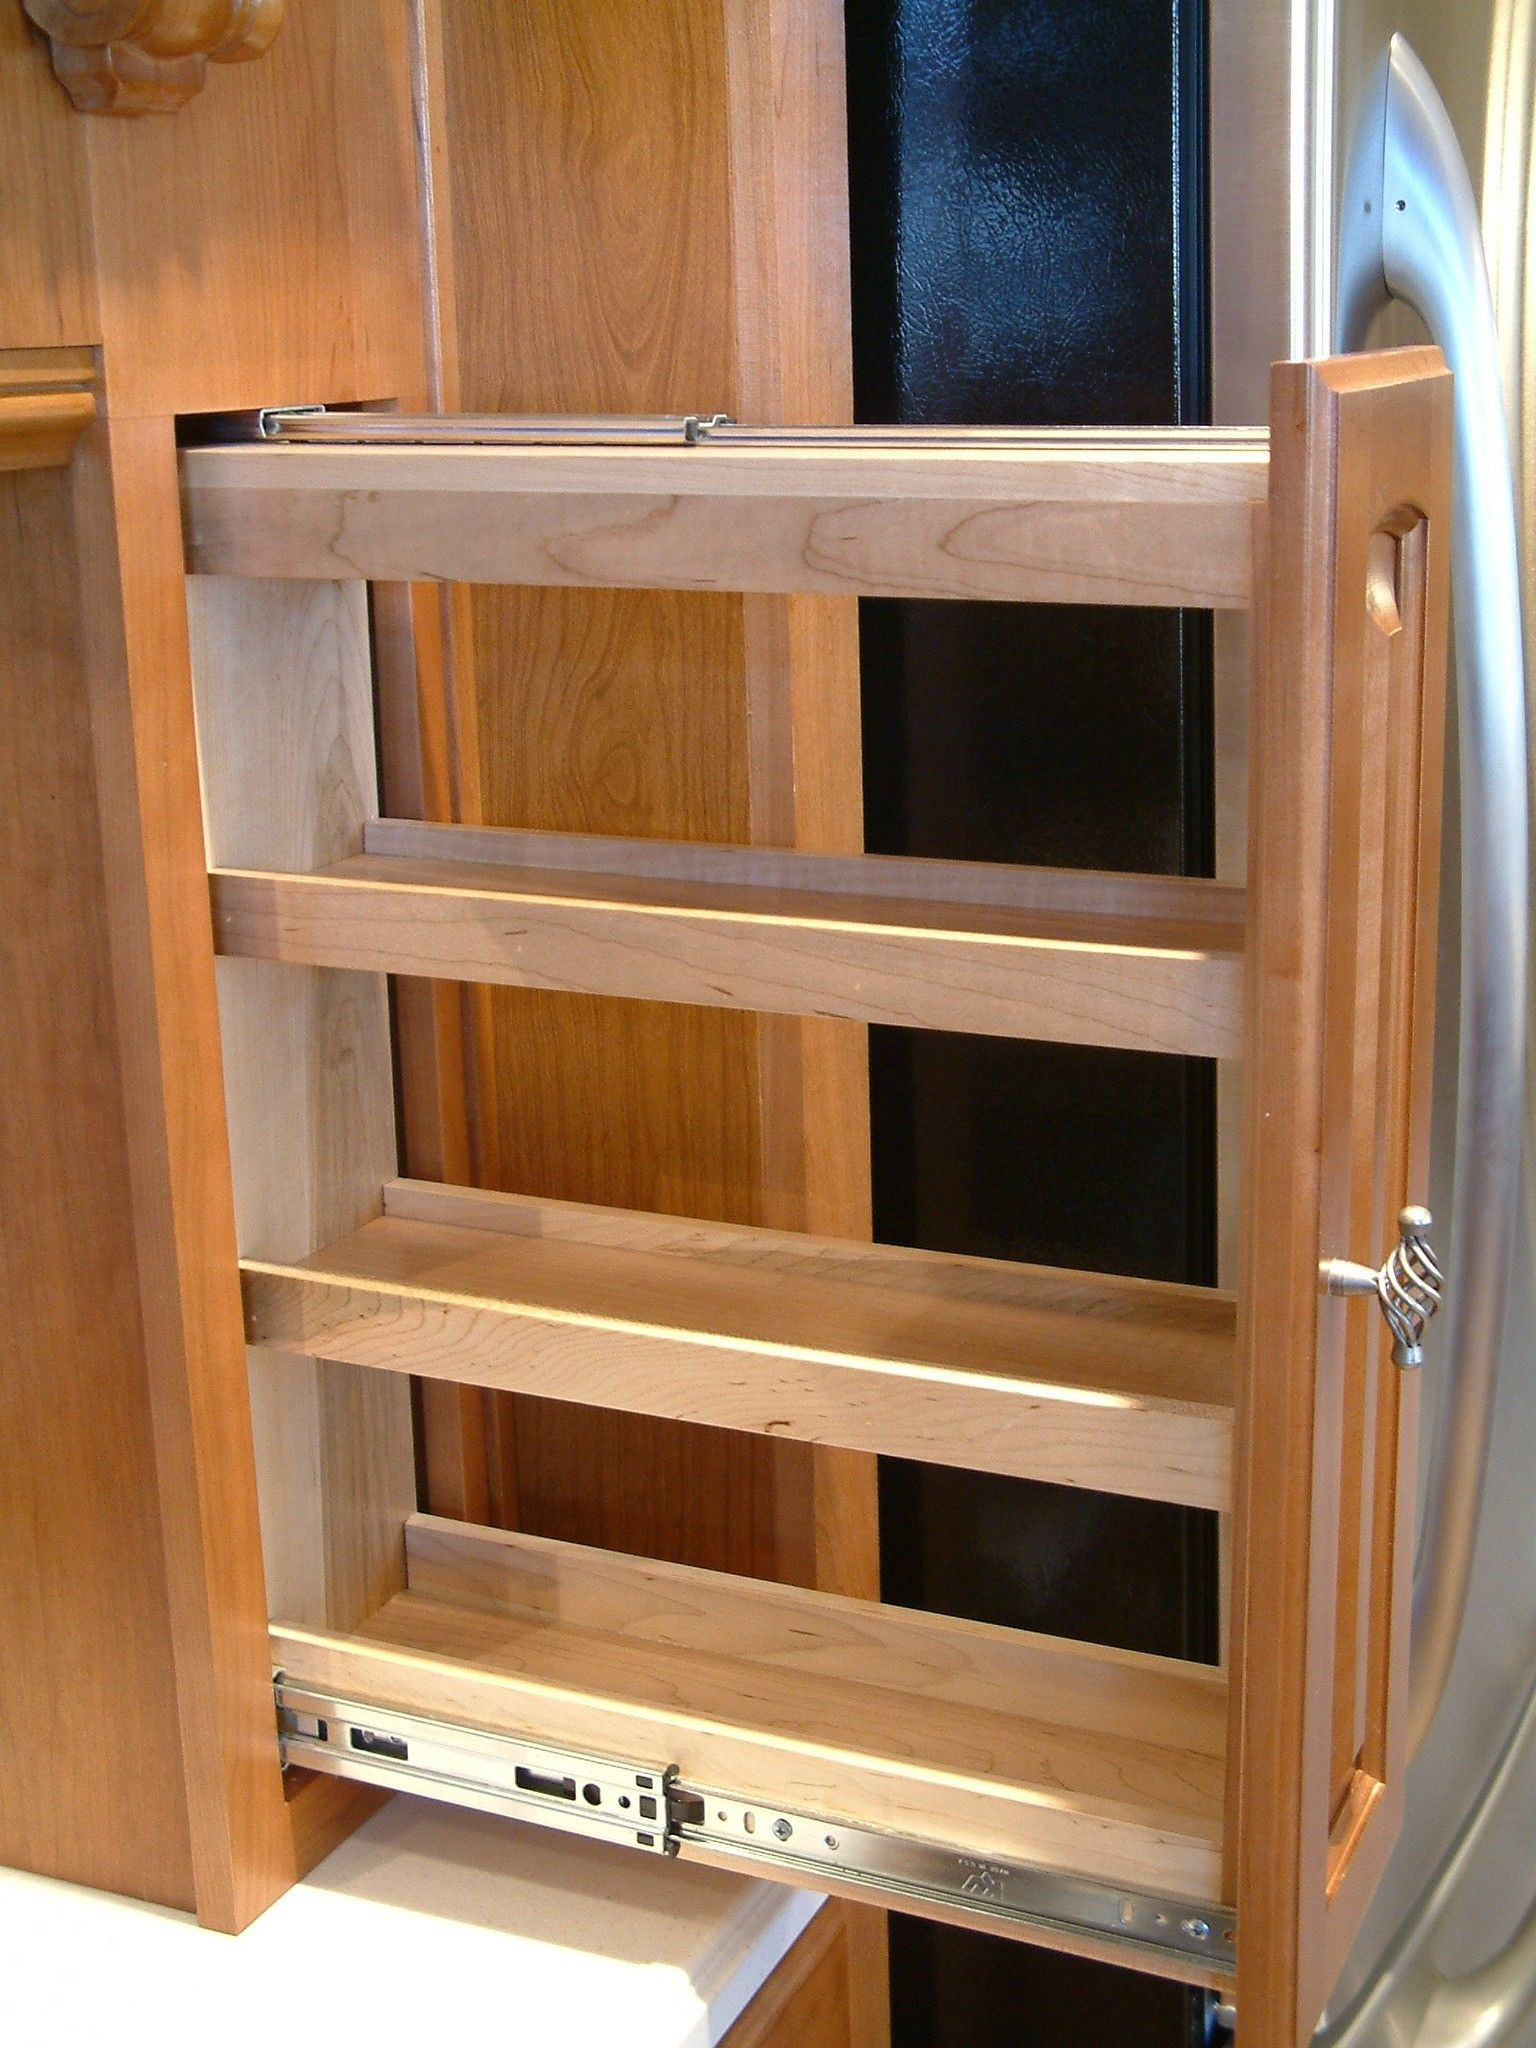 DIY Pull Out Cabinet Organizer
 e day when I build my dream home I m going to have a